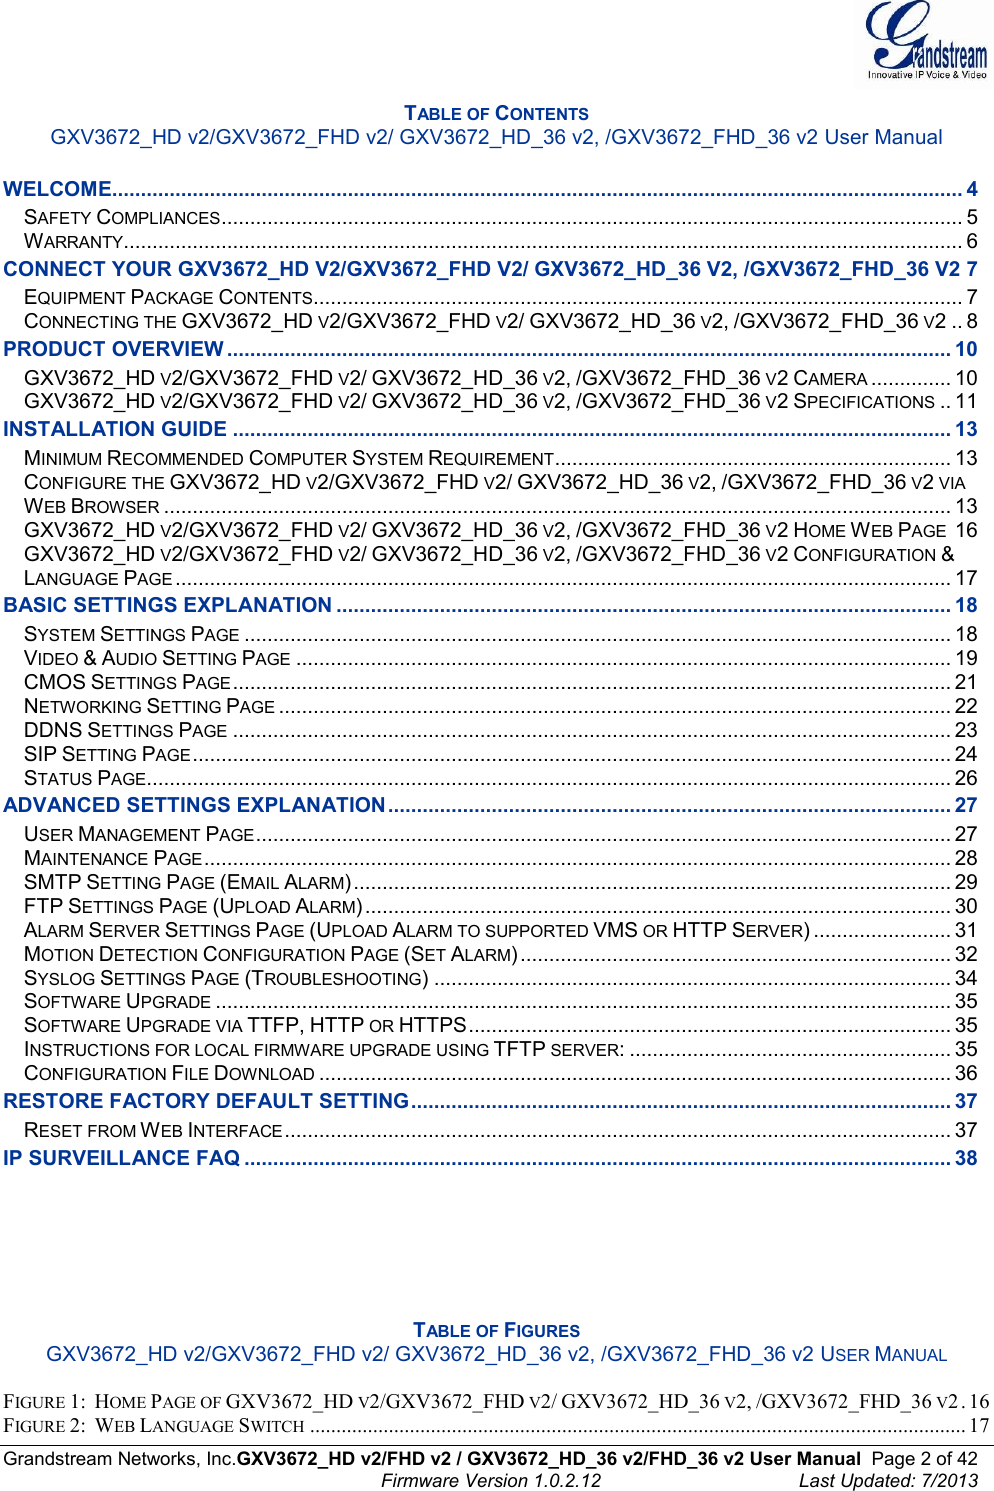  Grandstream Networks, Inc.GXV3672_HD v2/FHD v2 / GXV3672_HD_36 v2/FHD_36 v2 User Manual  Page 2 of 42    Firmware Version 1.0.2.12  Last Updated: 7/2013  TABLE OF CONTENTS GXV3672_HD v2/GXV3672_FHD v2/ GXV3672_HD_36 v2, /GXV3672_FHD_36 v2 User Manual  WELCOME.................................................................................................................................................... 4 SAFETY COMPLIANCES ................................................................................................................................. 5 WARRANTY .................................................................................................................................................. 6 CONNECT YOUR GXV3672_HD V2/GXV3672_FHD V2/ GXV3672_HD_36 V2, /GXV3672_FHD_36 V2 7 EQUIPMENT PACKAGE CONTENTS ................................................................................................................. 7 CONNECTING THE GXV3672_HD V2/GXV3672_FHD V2/ GXV3672_HD_36 V2, /GXV3672_FHD_36 V2 .. 8 PRODUCT OVERVIEW .............................................................................................................................. 10 GXV3672_HD V2/GXV3672_FHD V2/ GXV3672_HD_36 V2, /GXV3672_FHD_36 V2 CAMERA .............. 10 GXV3672_HD V2/GXV3672_FHD V2/ GXV3672_HD_36 V2, /GXV3672_FHD_36 V2 SPECIFICATIONS .. 11 INSTALLATION GUIDE ............................................................................................................................. 13 MINIMUM RECOMMENDED COMPUTER SYSTEM REQUIREMENT ..................................................................... 13 CONFIGURE THE GXV3672_HD V2/GXV3672_FHD V2/ GXV3672_HD_36 V2, /GXV3672_FHD_36 V2 VIA WEB BROWSER ......................................................................................................................................... 13 GXV3672_HD V2/GXV3672_FHD V2/ GXV3672_HD_36 V2, /GXV3672_FHD_36 V2 HOME WEB PAGE 16 GXV3672_HD V2/GXV3672_FHD V2/ GXV3672_HD_36 V2, /GXV3672_FHD_36 V2 CONFIGURATION &amp; LANGUAGE PAGE ....................................................................................................................................... 17 BASIC SETTINGS EXPLANATION ........................................................................................................... 18 SYSTEM SETTINGS PAGE ........................................................................................................................... 18 VIDEO &amp; AUDIO SETTING PAGE .................................................................................................................. 19 CMOS SETTINGS PAGE ............................................................................................................................. 21 NETWORKING SETTING PAGE ..................................................................................................................... 22 DDNS SETTINGS PAGE ............................................................................................................................. 23 SIP SETTING PAGE .................................................................................................................................... 24 STATUS PAGE ............................................................................................................................................ 26 ADVANCED SETTINGS EXPLANATION .................................................................................................. 27 USER MANAGEMENT PAGE ......................................................................................................................... 27 MAINTENANCE PAGE .................................................................................................................................. 28 SMTP SETTING PAGE (EMAIL ALARM) ........................................................................................................ 29 FTP SETTINGS PAGE (UPLOAD ALARM) ...................................................................................................... 30 ALARM SERVER SETTINGS PAGE (UPLOAD ALARM TO SUPPORTED VMS OR HTTP SERVER) ........................ 31 MOTION DETECTION CONFIGURATION PAGE (SET ALARM) ........................................................................... 32 SYSLOG SETTINGS PAGE (TROUBLESHOOTING) .......................................................................................... 34 SOFTWARE UPGRADE ................................................................................................................................ 35 SOFTWARE UPGRADE VIA TTFP, HTTP OR HTTPS .................................................................................... 35 INSTRUCTIONS FOR LOCAL FIRMWARE UPGRADE USING TFTP SERVER: ........................................................ 35 CONFIGURATION FILE DOWNLOAD .............................................................................................................. 36 RESTORE FACTORY DEFAULT SETTING .............................................................................................. 37 RESET FROM WEB INTERFACE .................................................................................................................... 37 IP SURVEILLANCE FAQ ........................................................................................................................... 38       TABLE OF FIGURES GXV3672_HD v2/GXV3672_FHD v2/ GXV3672_HD_36 v2, /GXV3672_FHD_36 v2 USER MANUAL  FIGURE 1:  HOME PAGE OF GXV3672_HD V2/GXV3672_FHD V2/ GXV3672_HD_36 V2, /GXV3672_FHD_36 V2 . 16 FIGURE 2:  WEB LANGUAGE SWITCH ............................................................................................................................. 17 